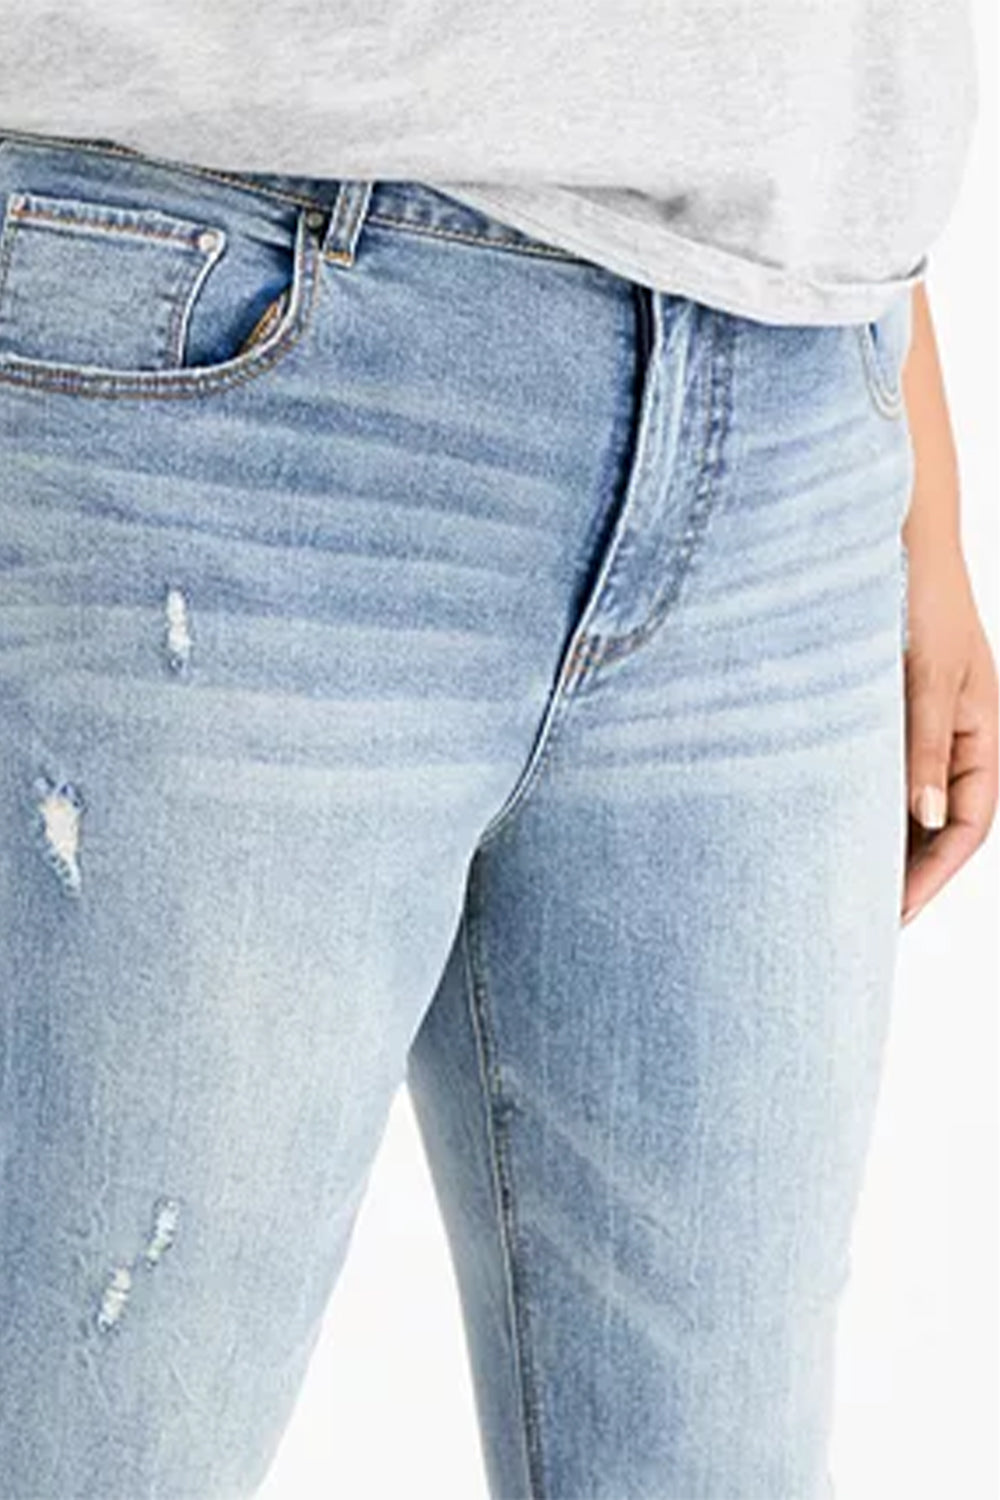 Trendy Plus Size High Rise Flared-Leg Jeans